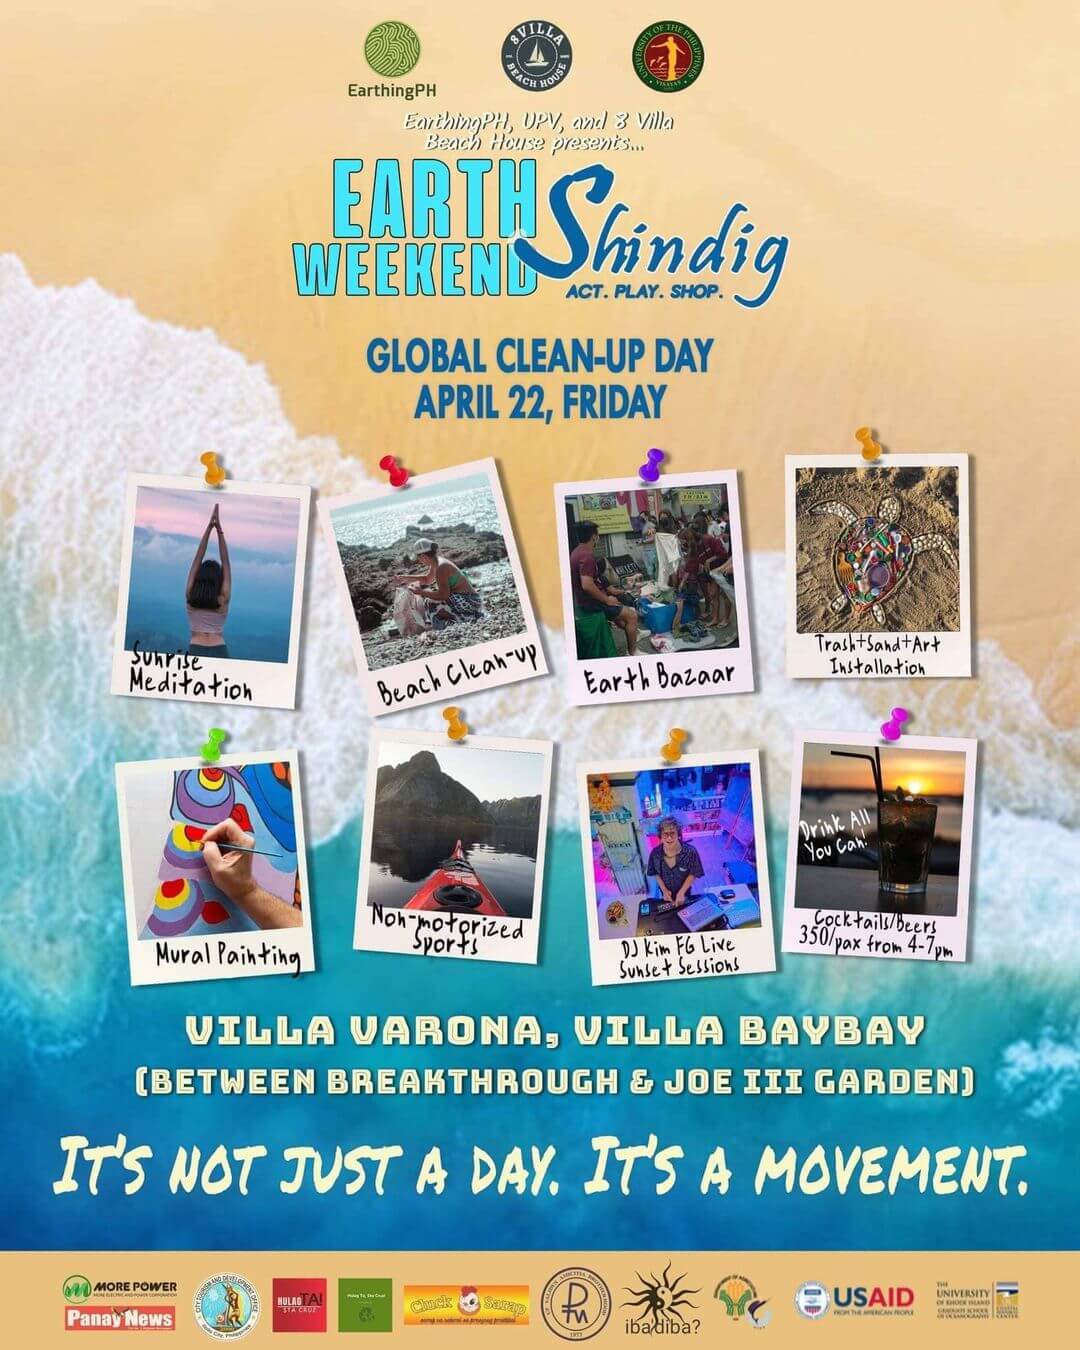 UPV, UP Validus Amicitia to lead beach clean-up on Earth Day